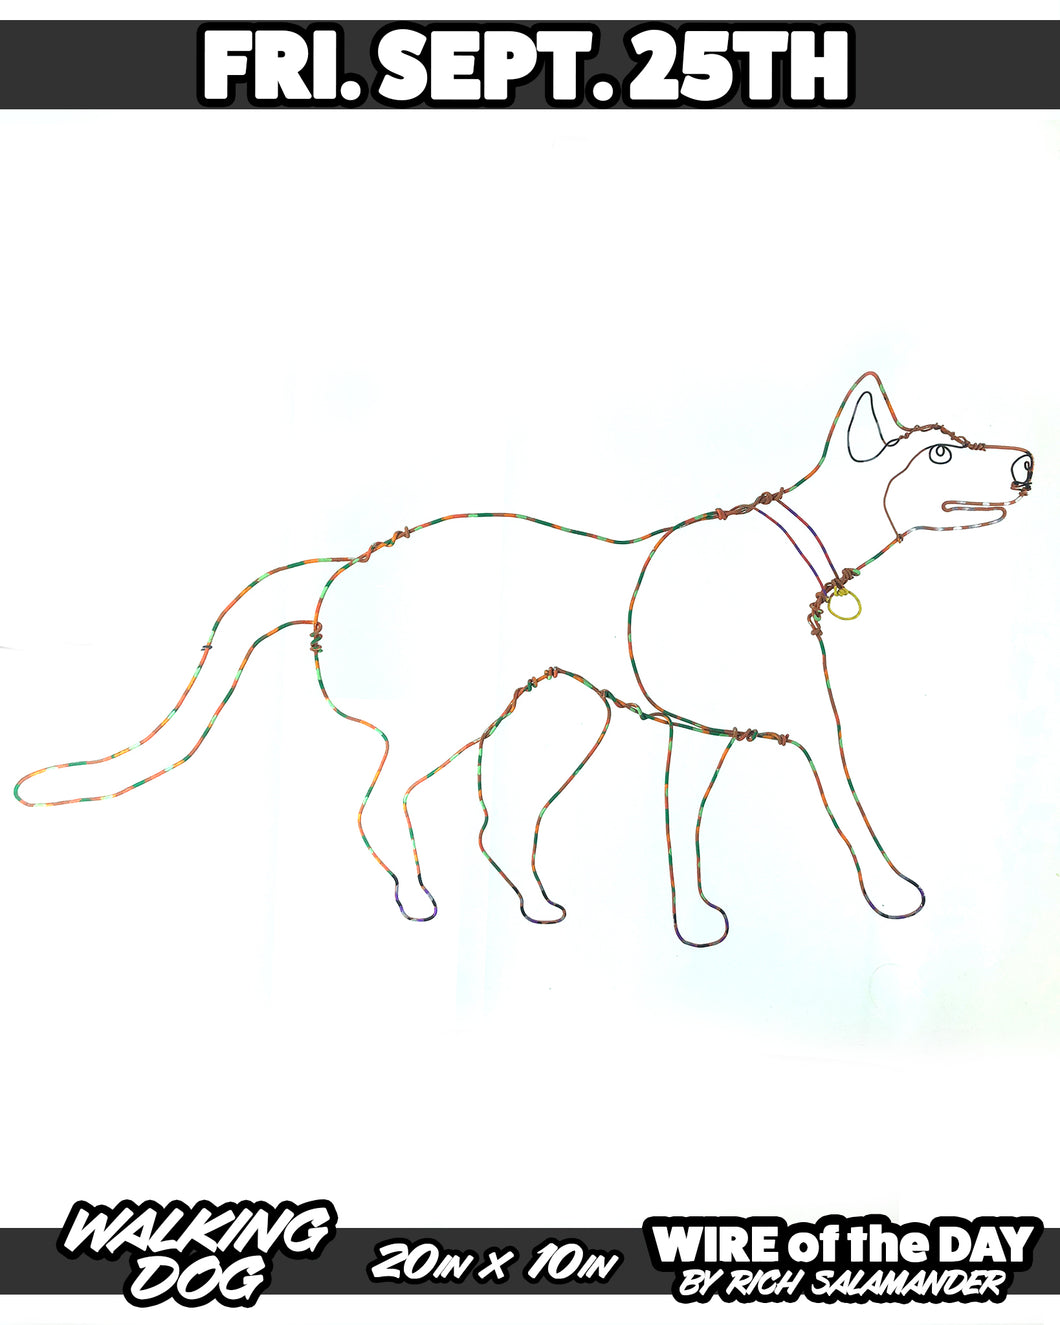 WIRE of the DAY WALKING DOG